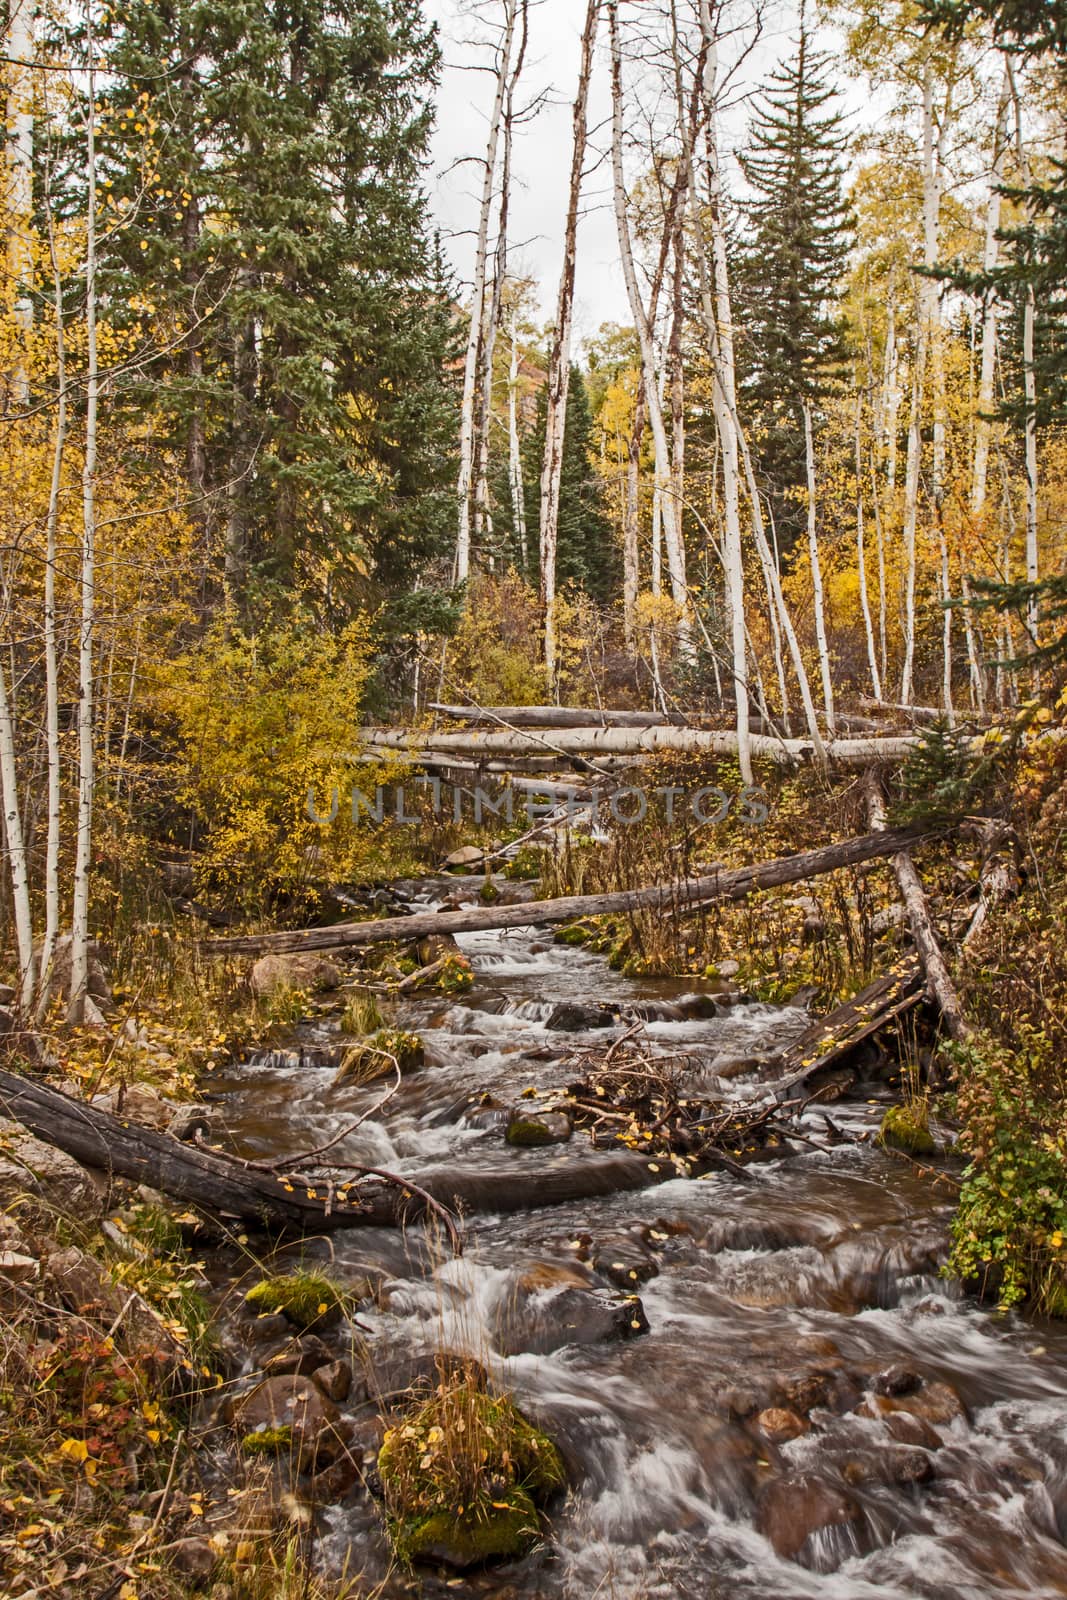 A small mountain stream in the Manti-La Sal National Forest